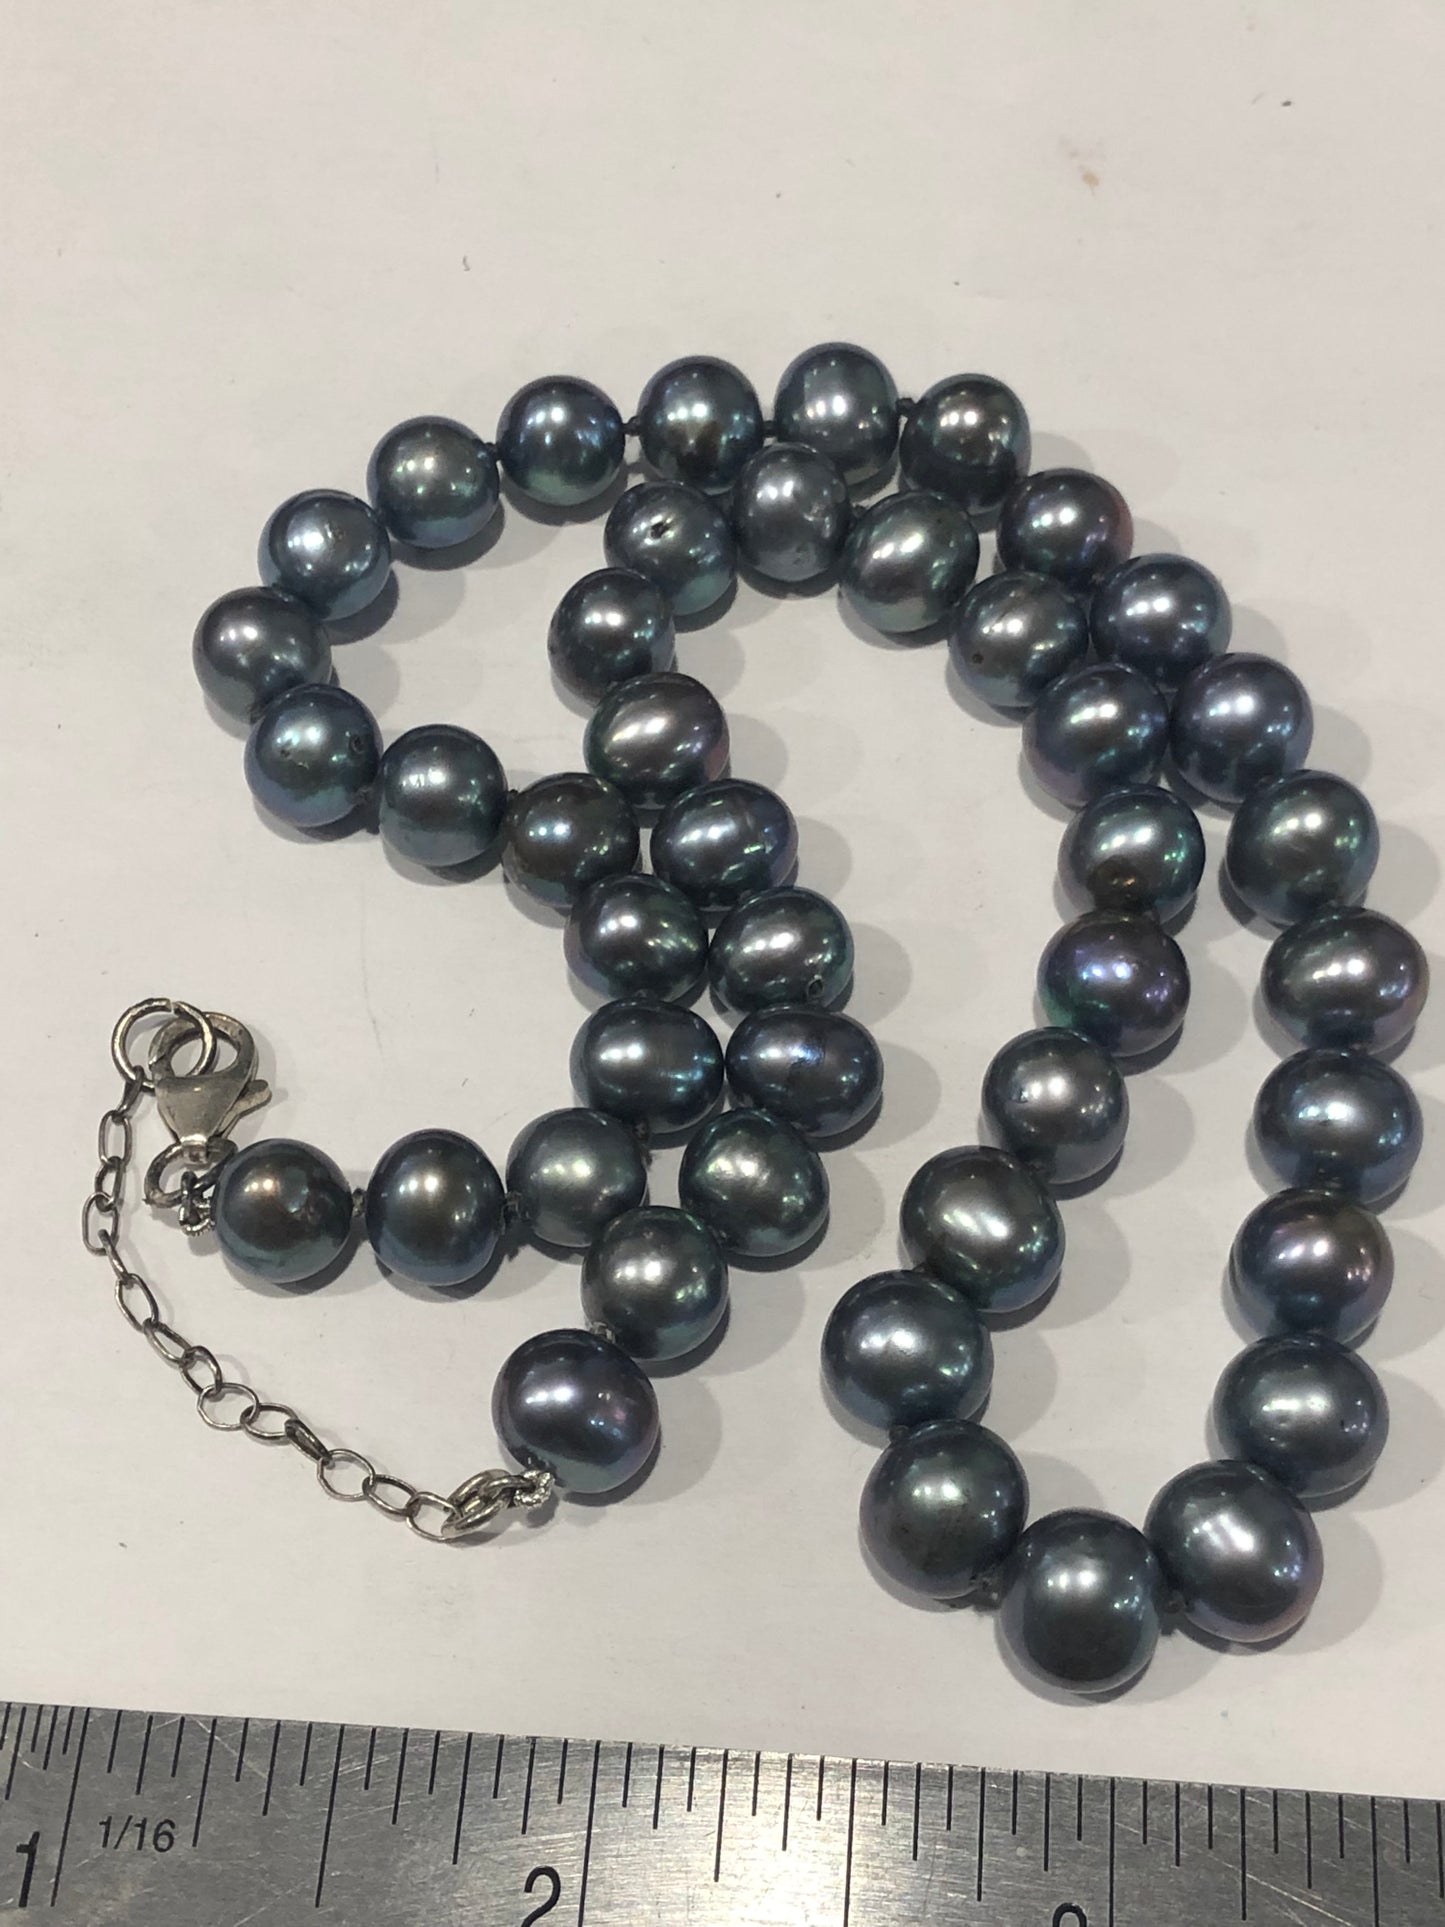 Vintage black freshwater pearl bead necklace, sterling silver clasp